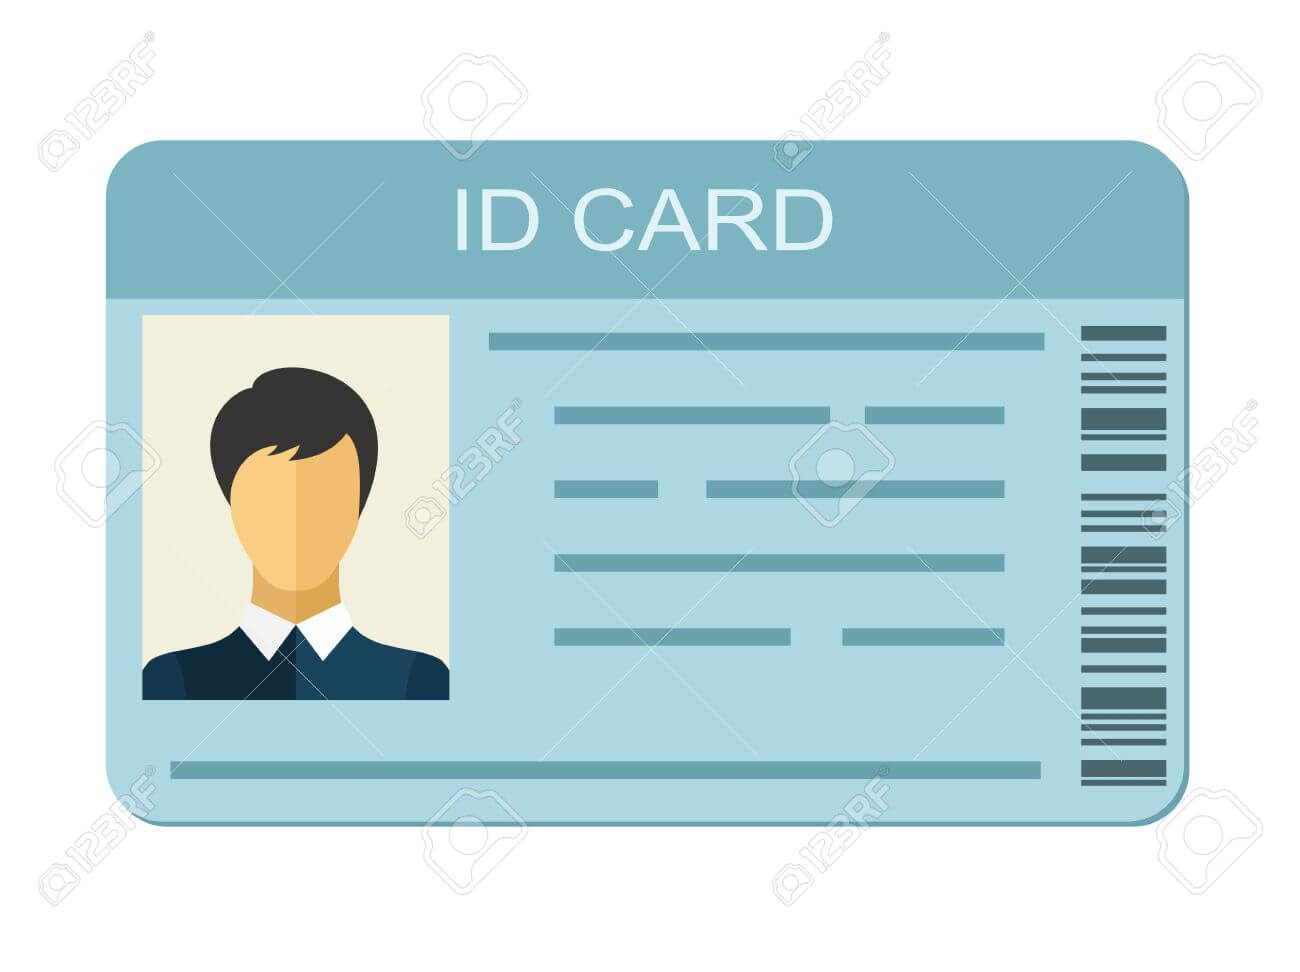 Id Card Isolated On White Background. Identification Card Icon With Personal Identification Card Template